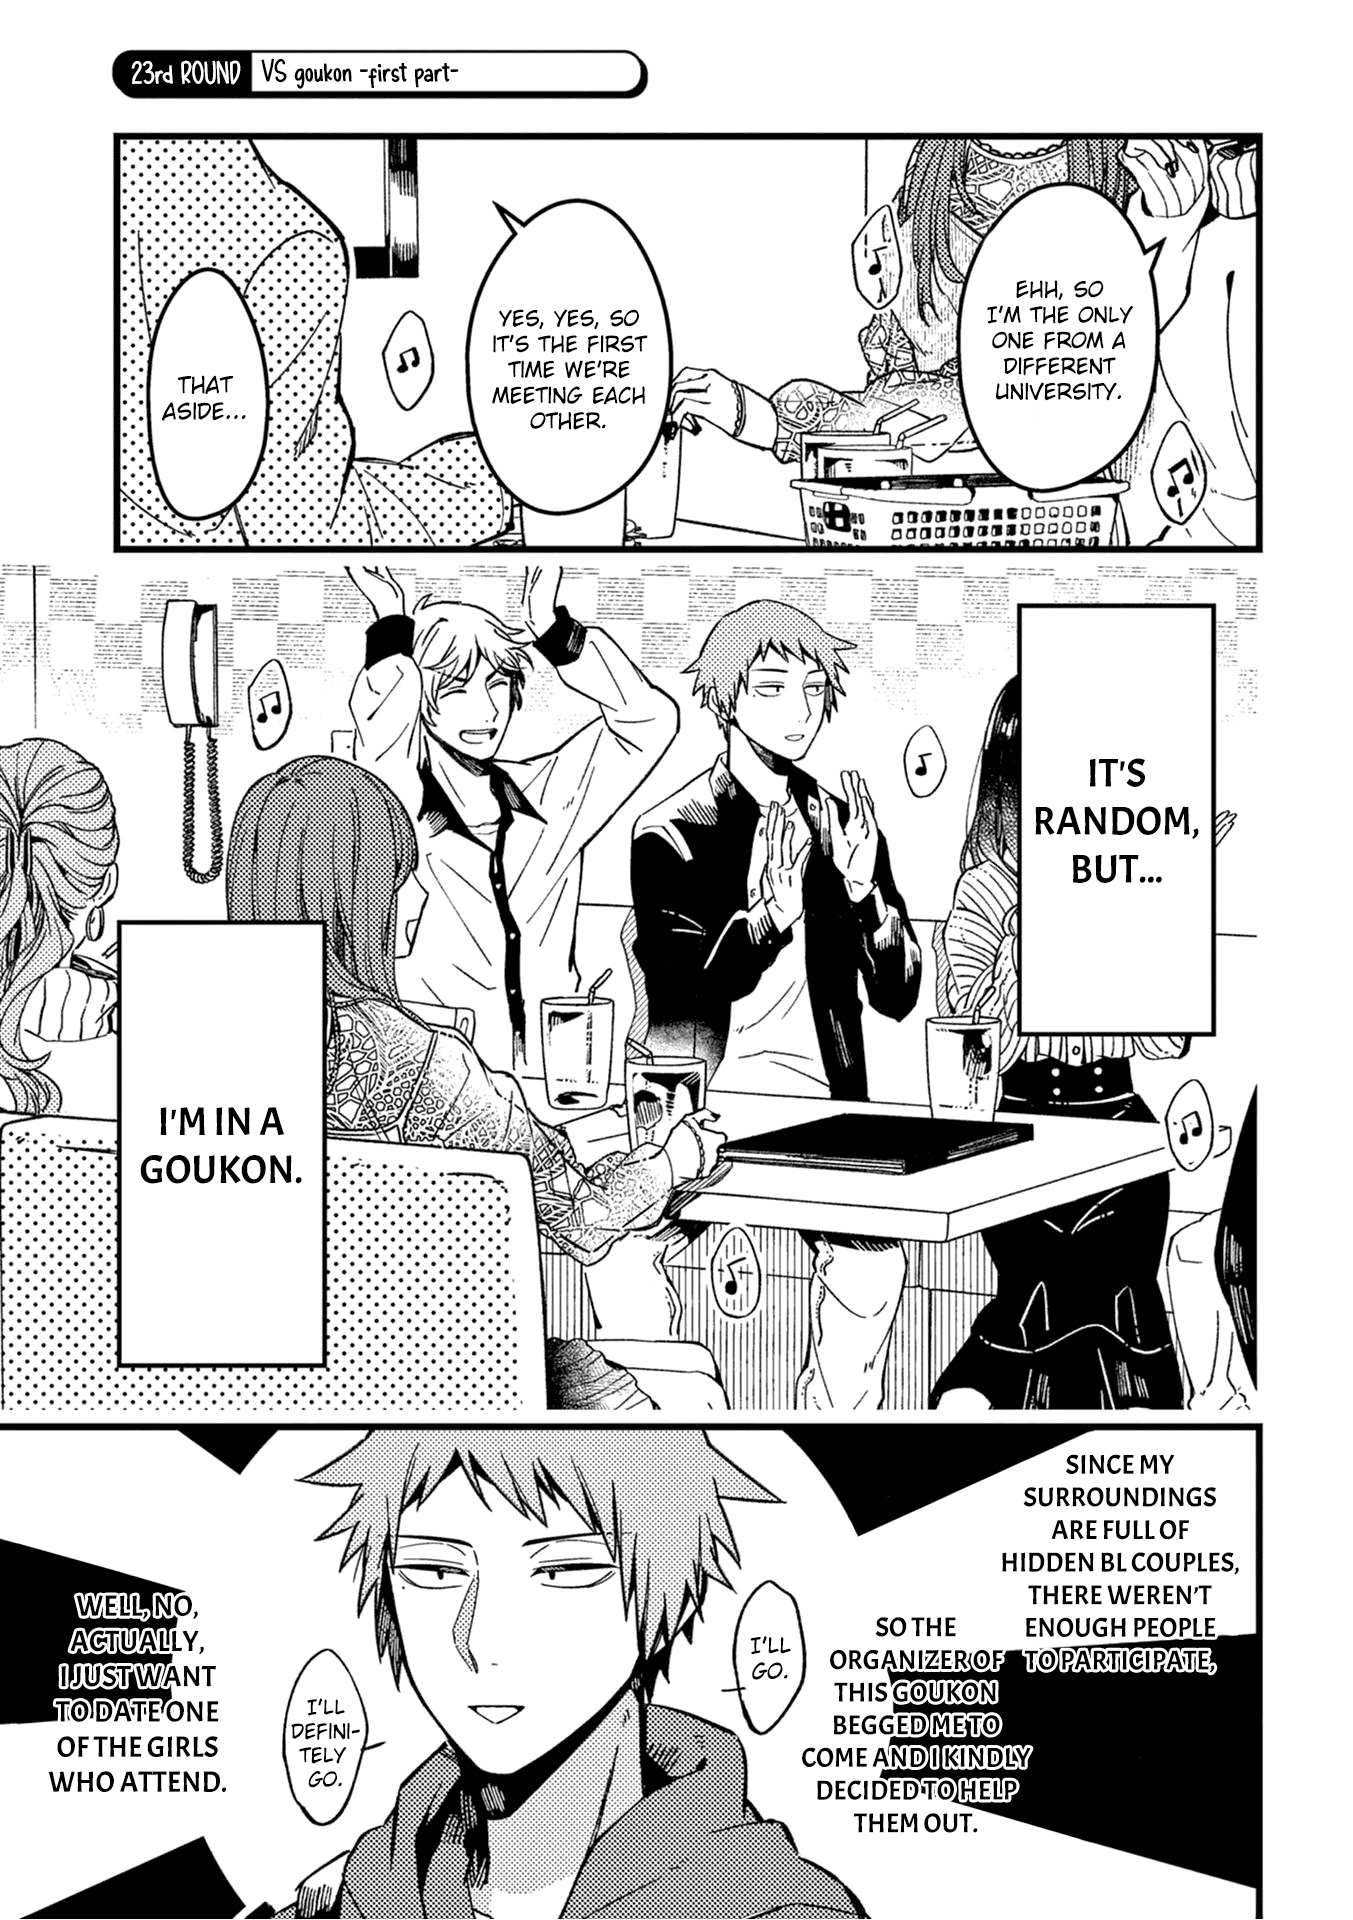 A World Where Everything Definitely Becomes Bl Vs. The Man Who Definitely Doesn't Want To Be In A Bl Vol.2 Chapter 23: Vs Goukon - First Part - Picture 2